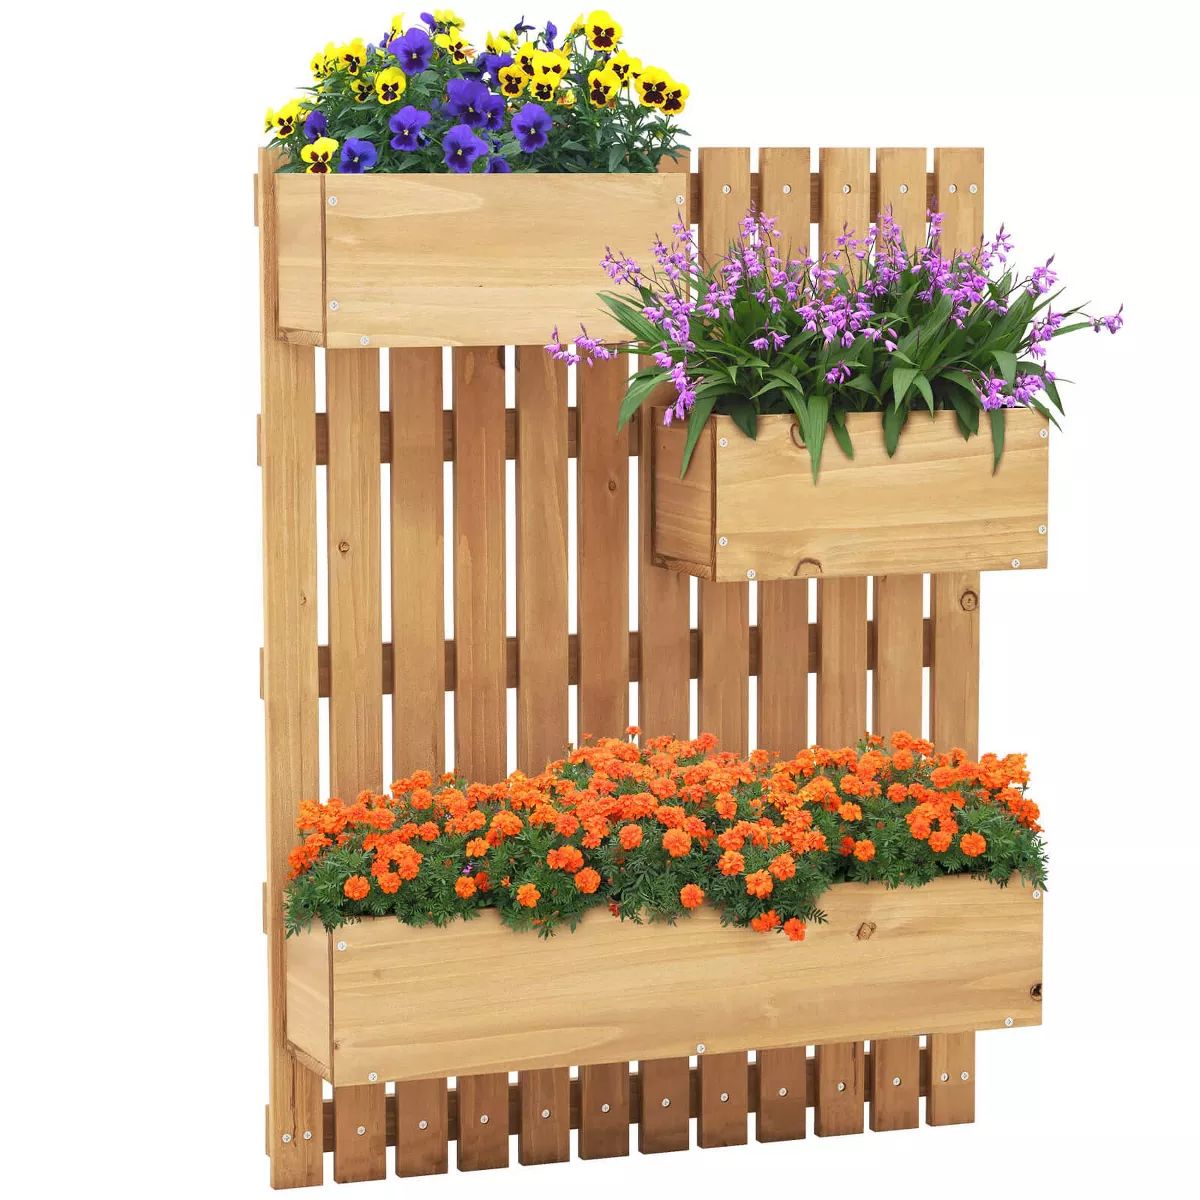 Costway Wall Mounted Garden Planter with 3 Planter Boxes Drainage Holes Non-woven Liners | Target